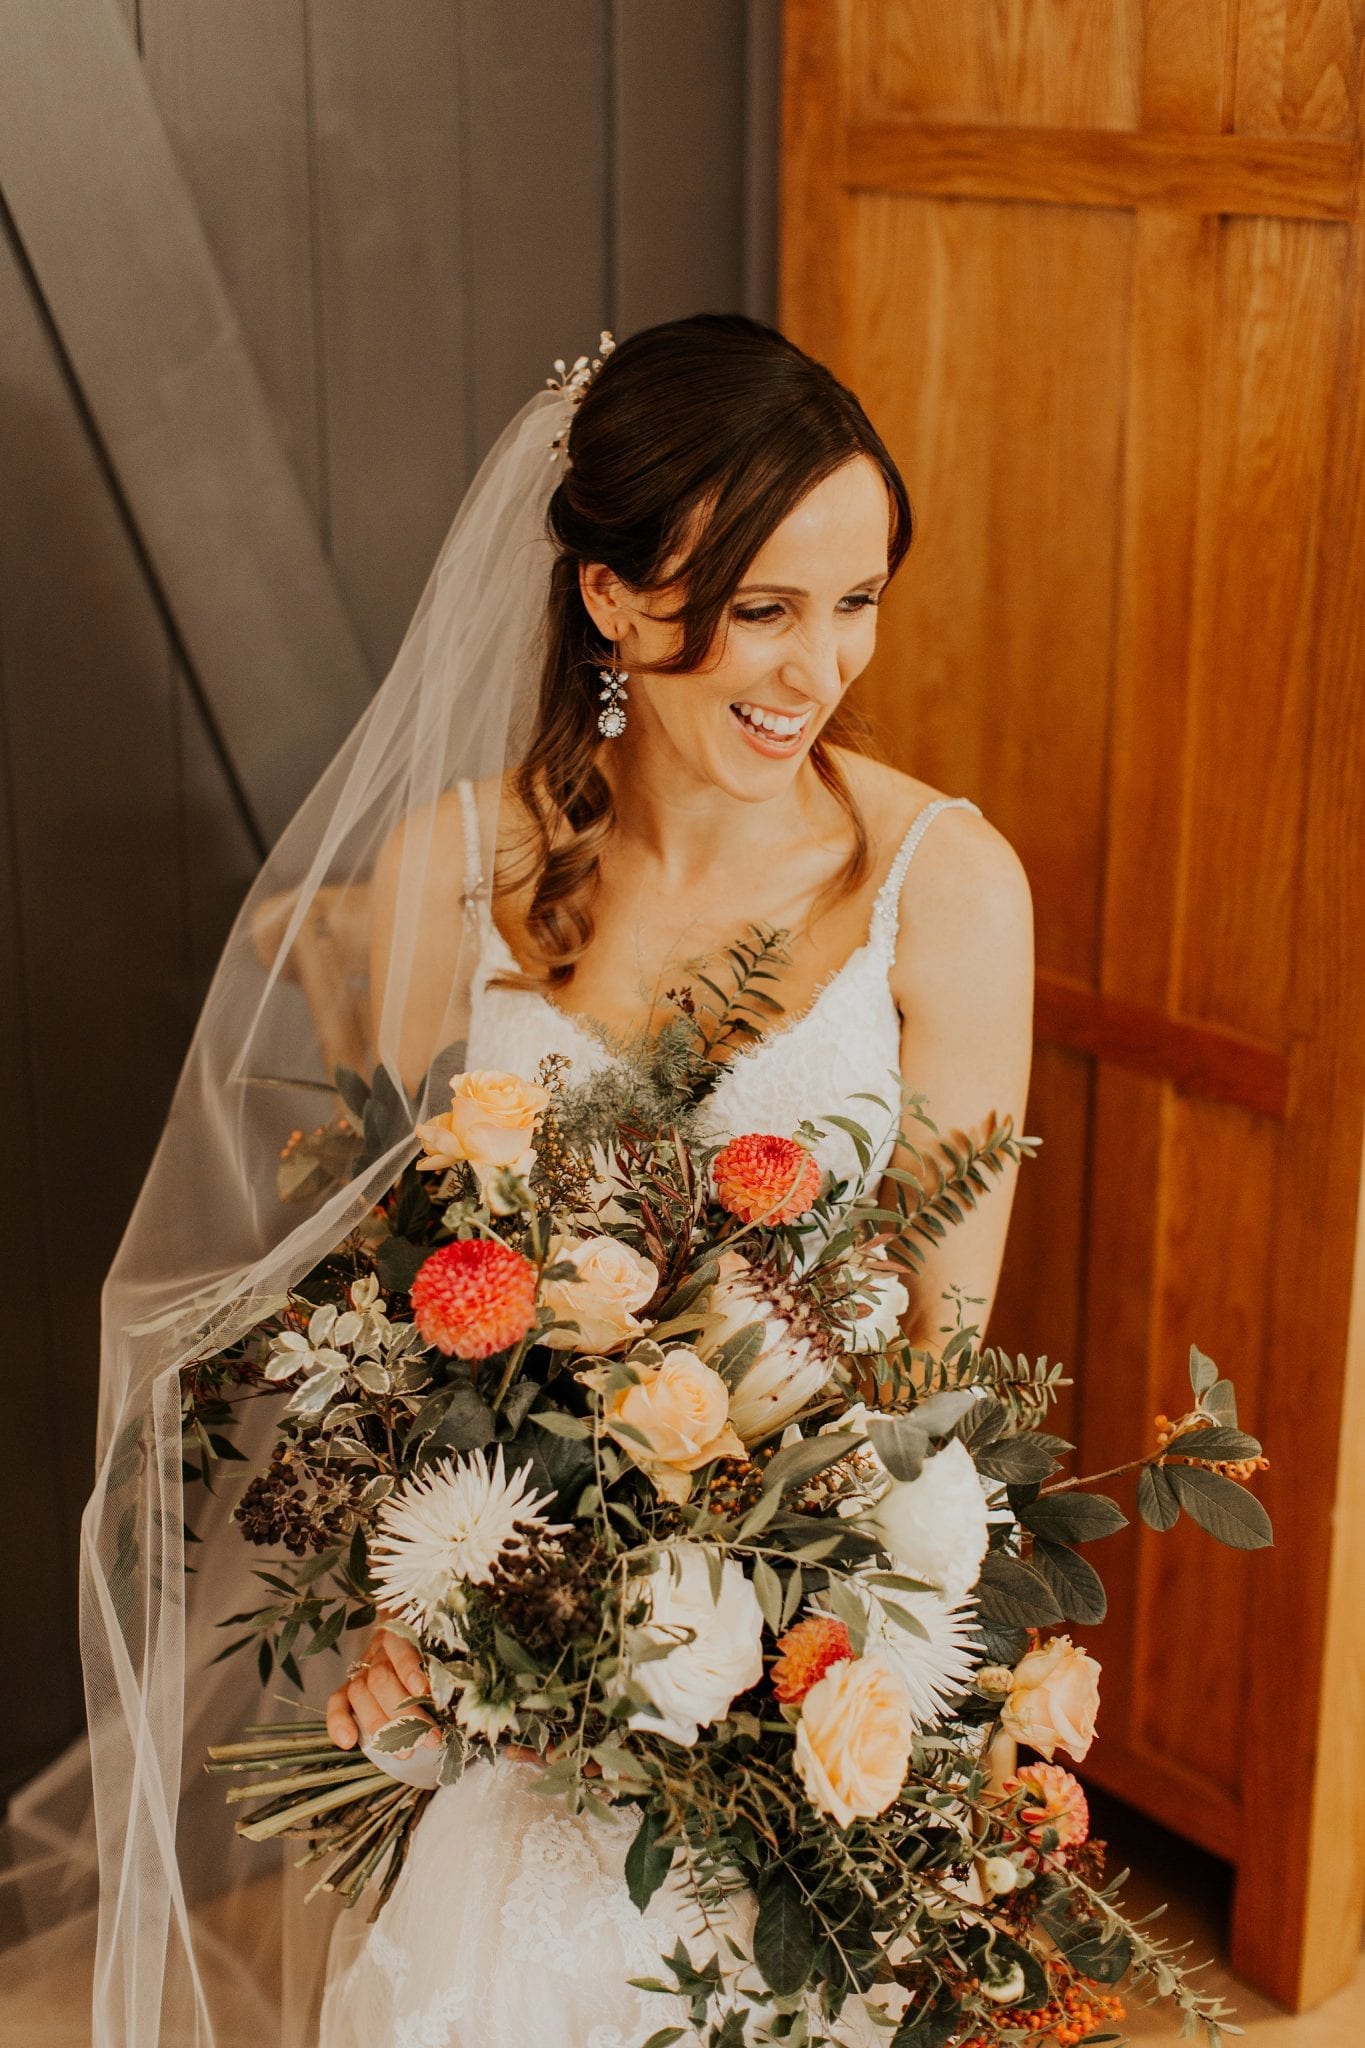 Bride with autumn bouquet of rose hips, proteas dahlias, and foraged greenery by Kim Chan Events